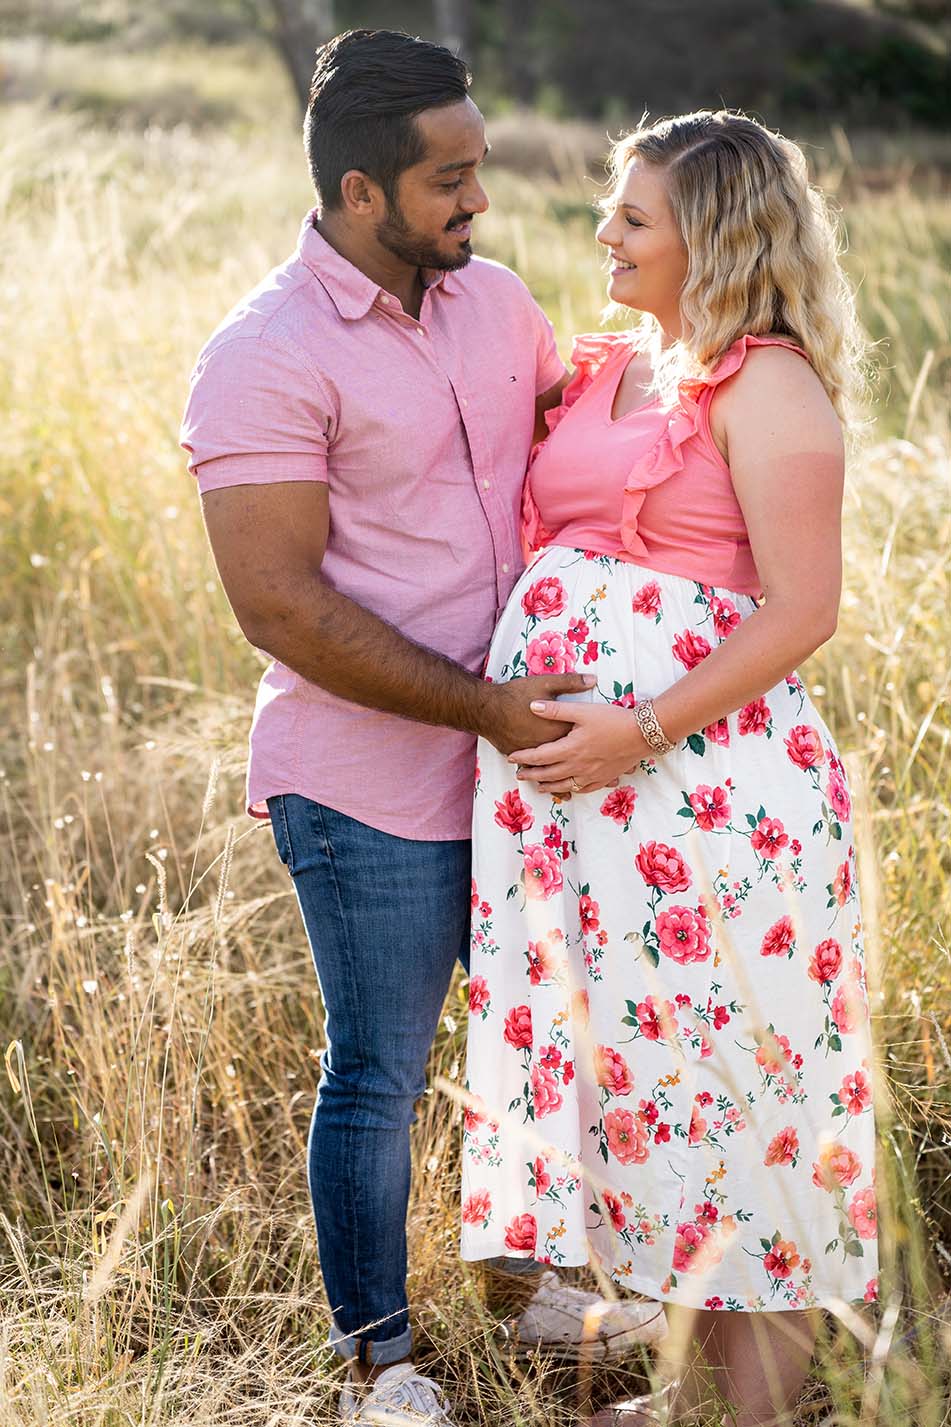 Maternity Photography - Husband and wife